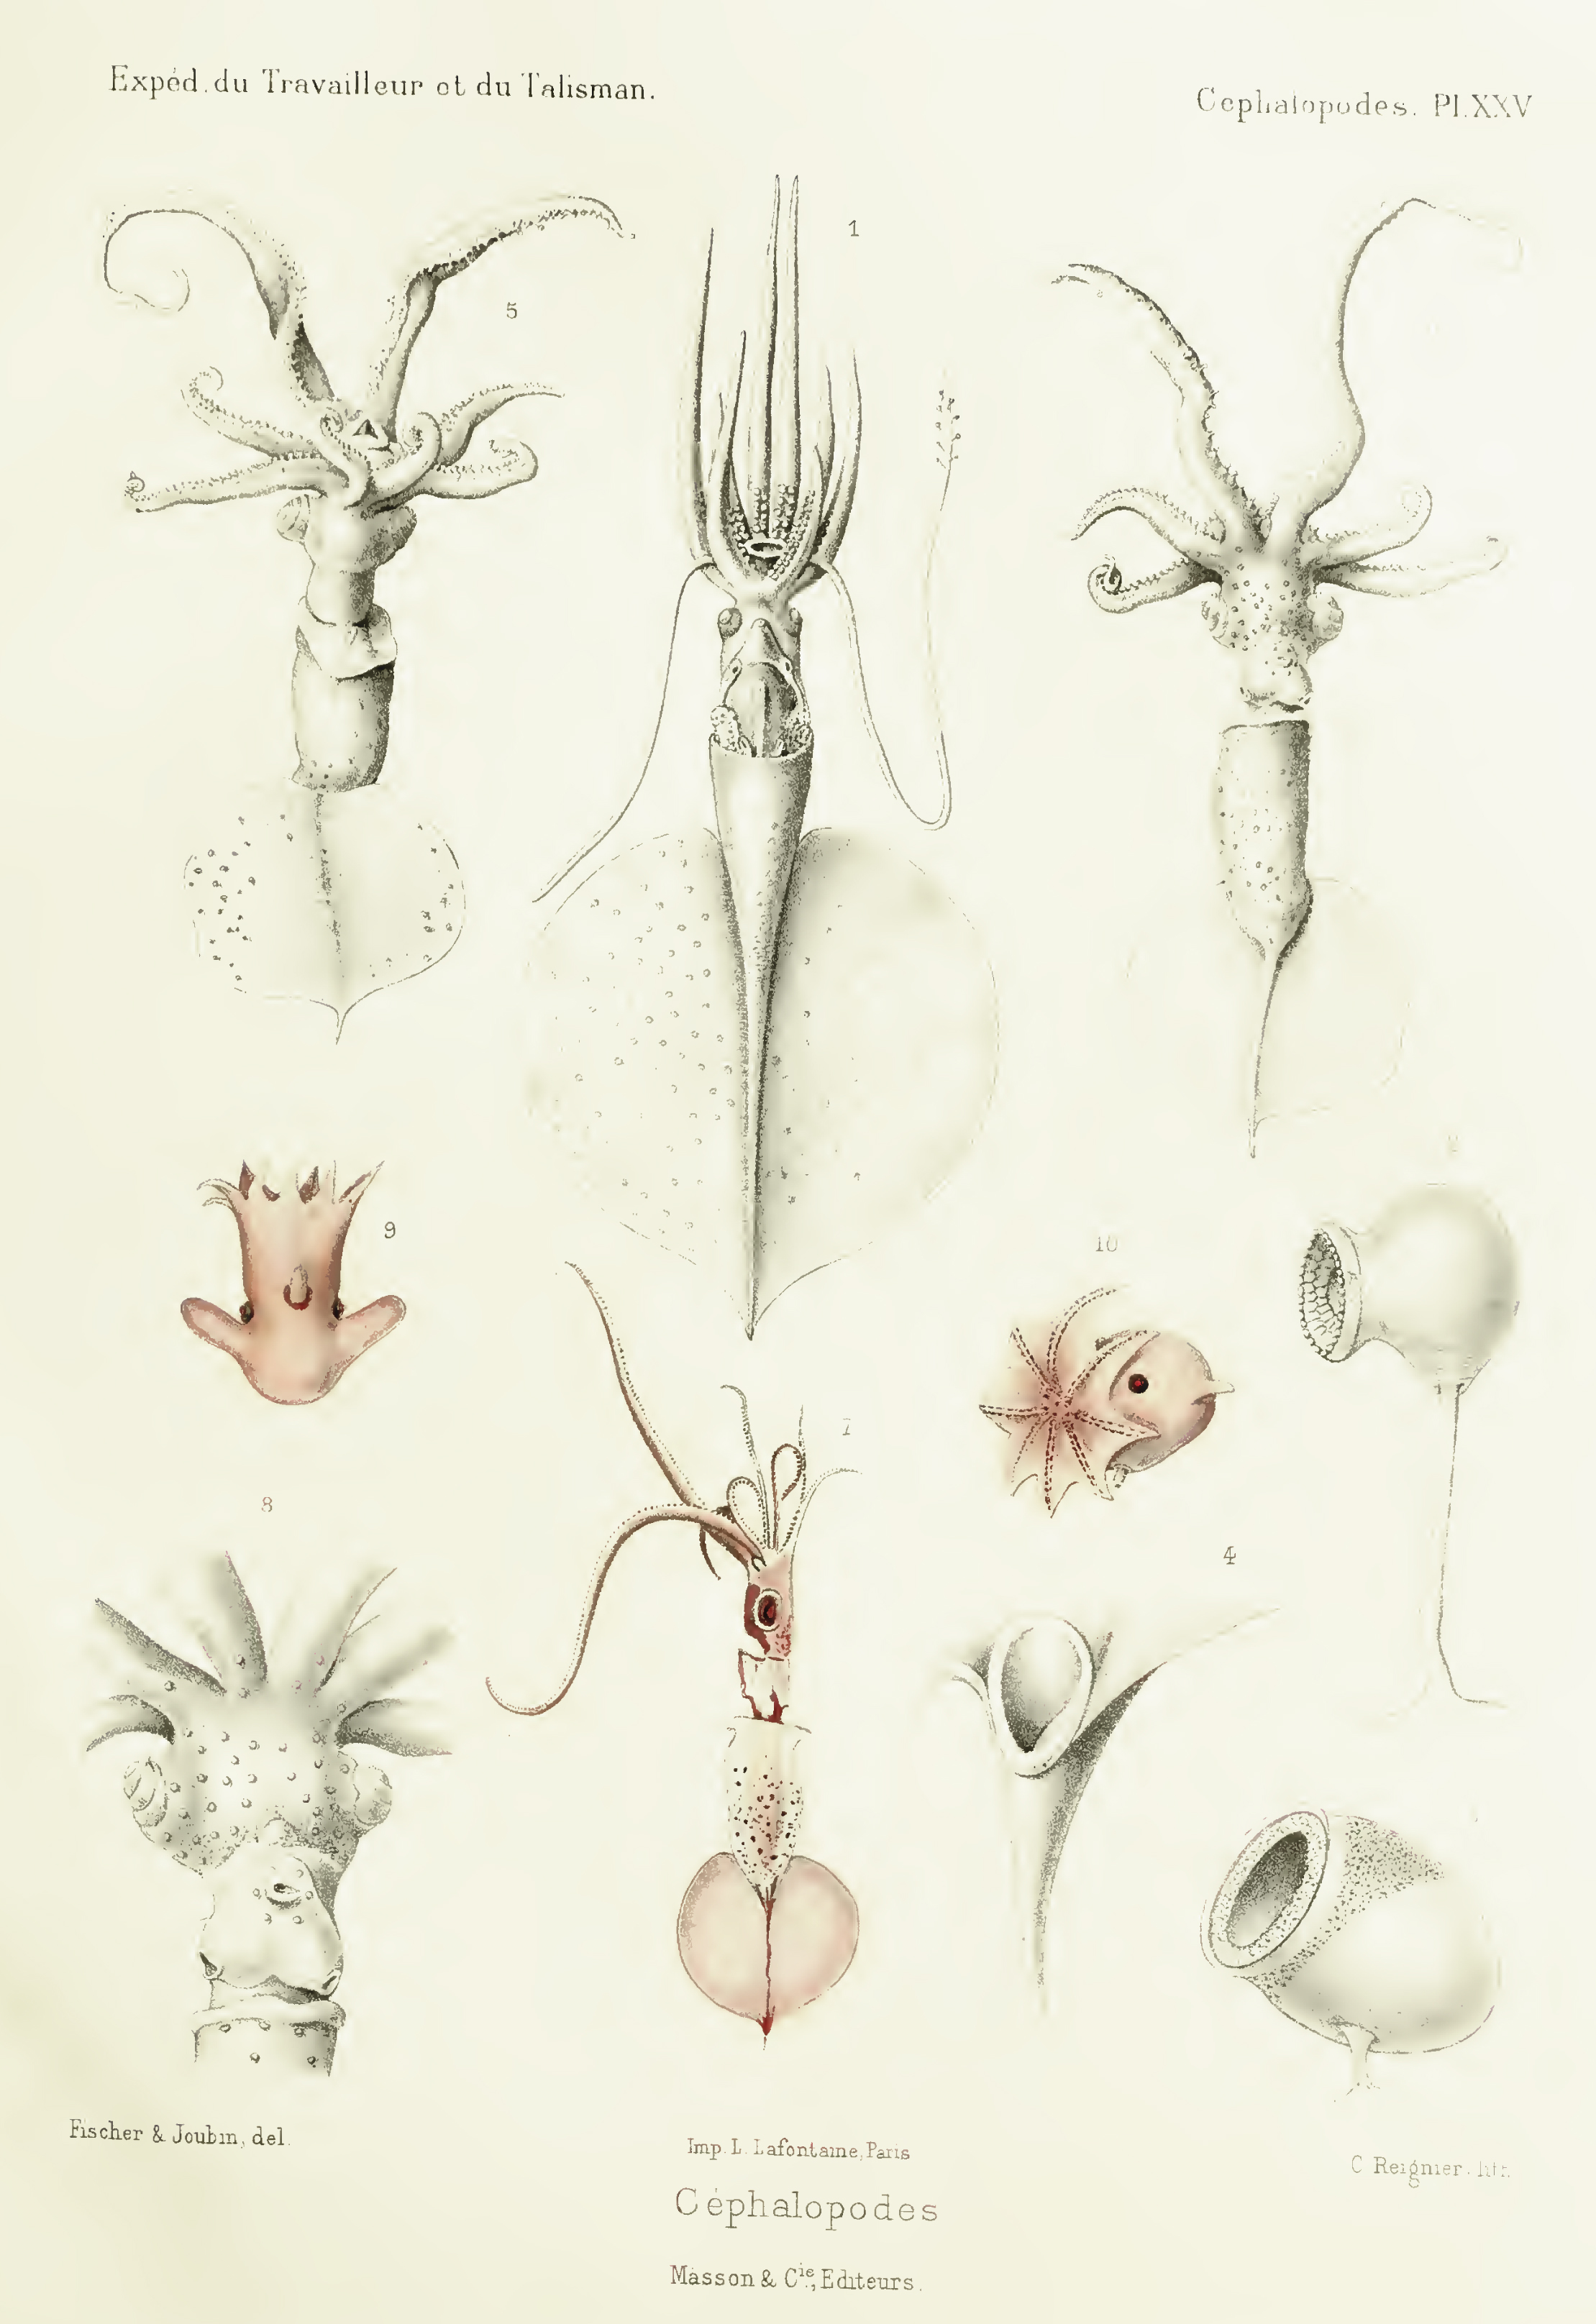 From Fischer's 1906  "Céphalopodes" of the expeditions